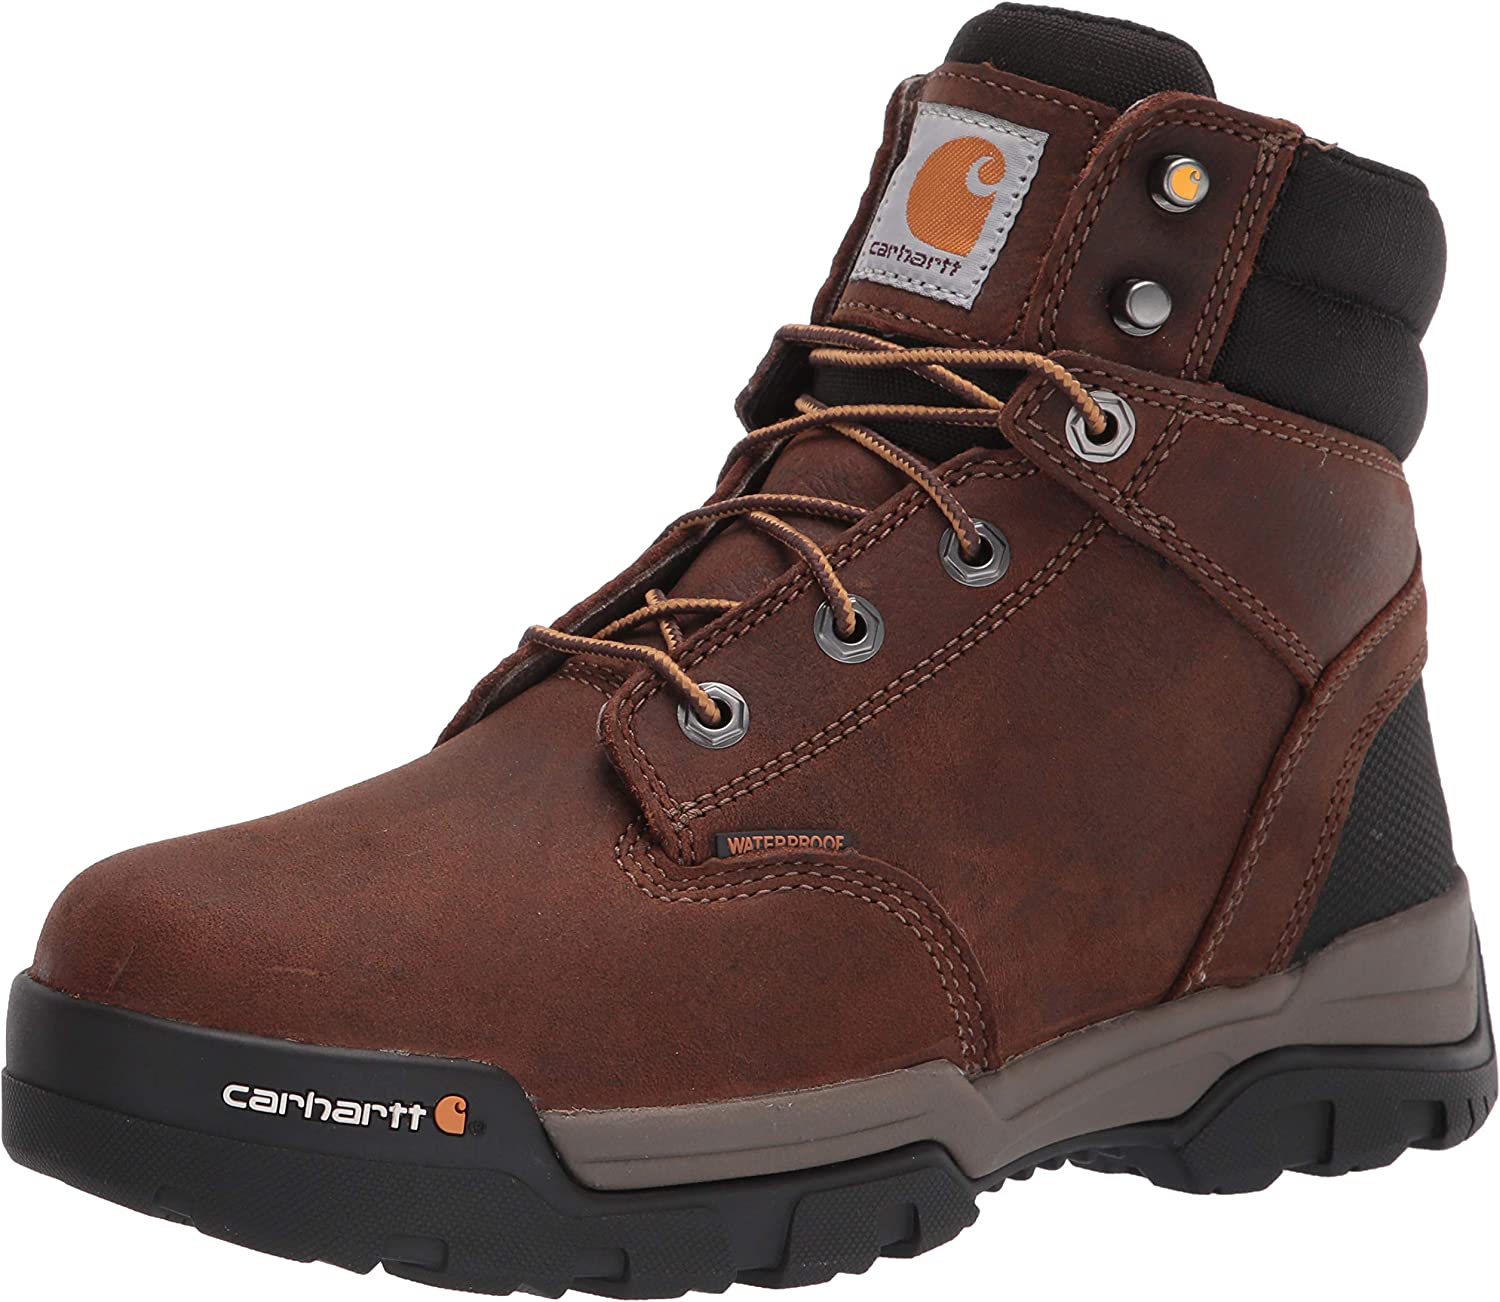 Ground Force WP 6" Composite Toe Work Boot in Bison Brown Oil Tan from the size view